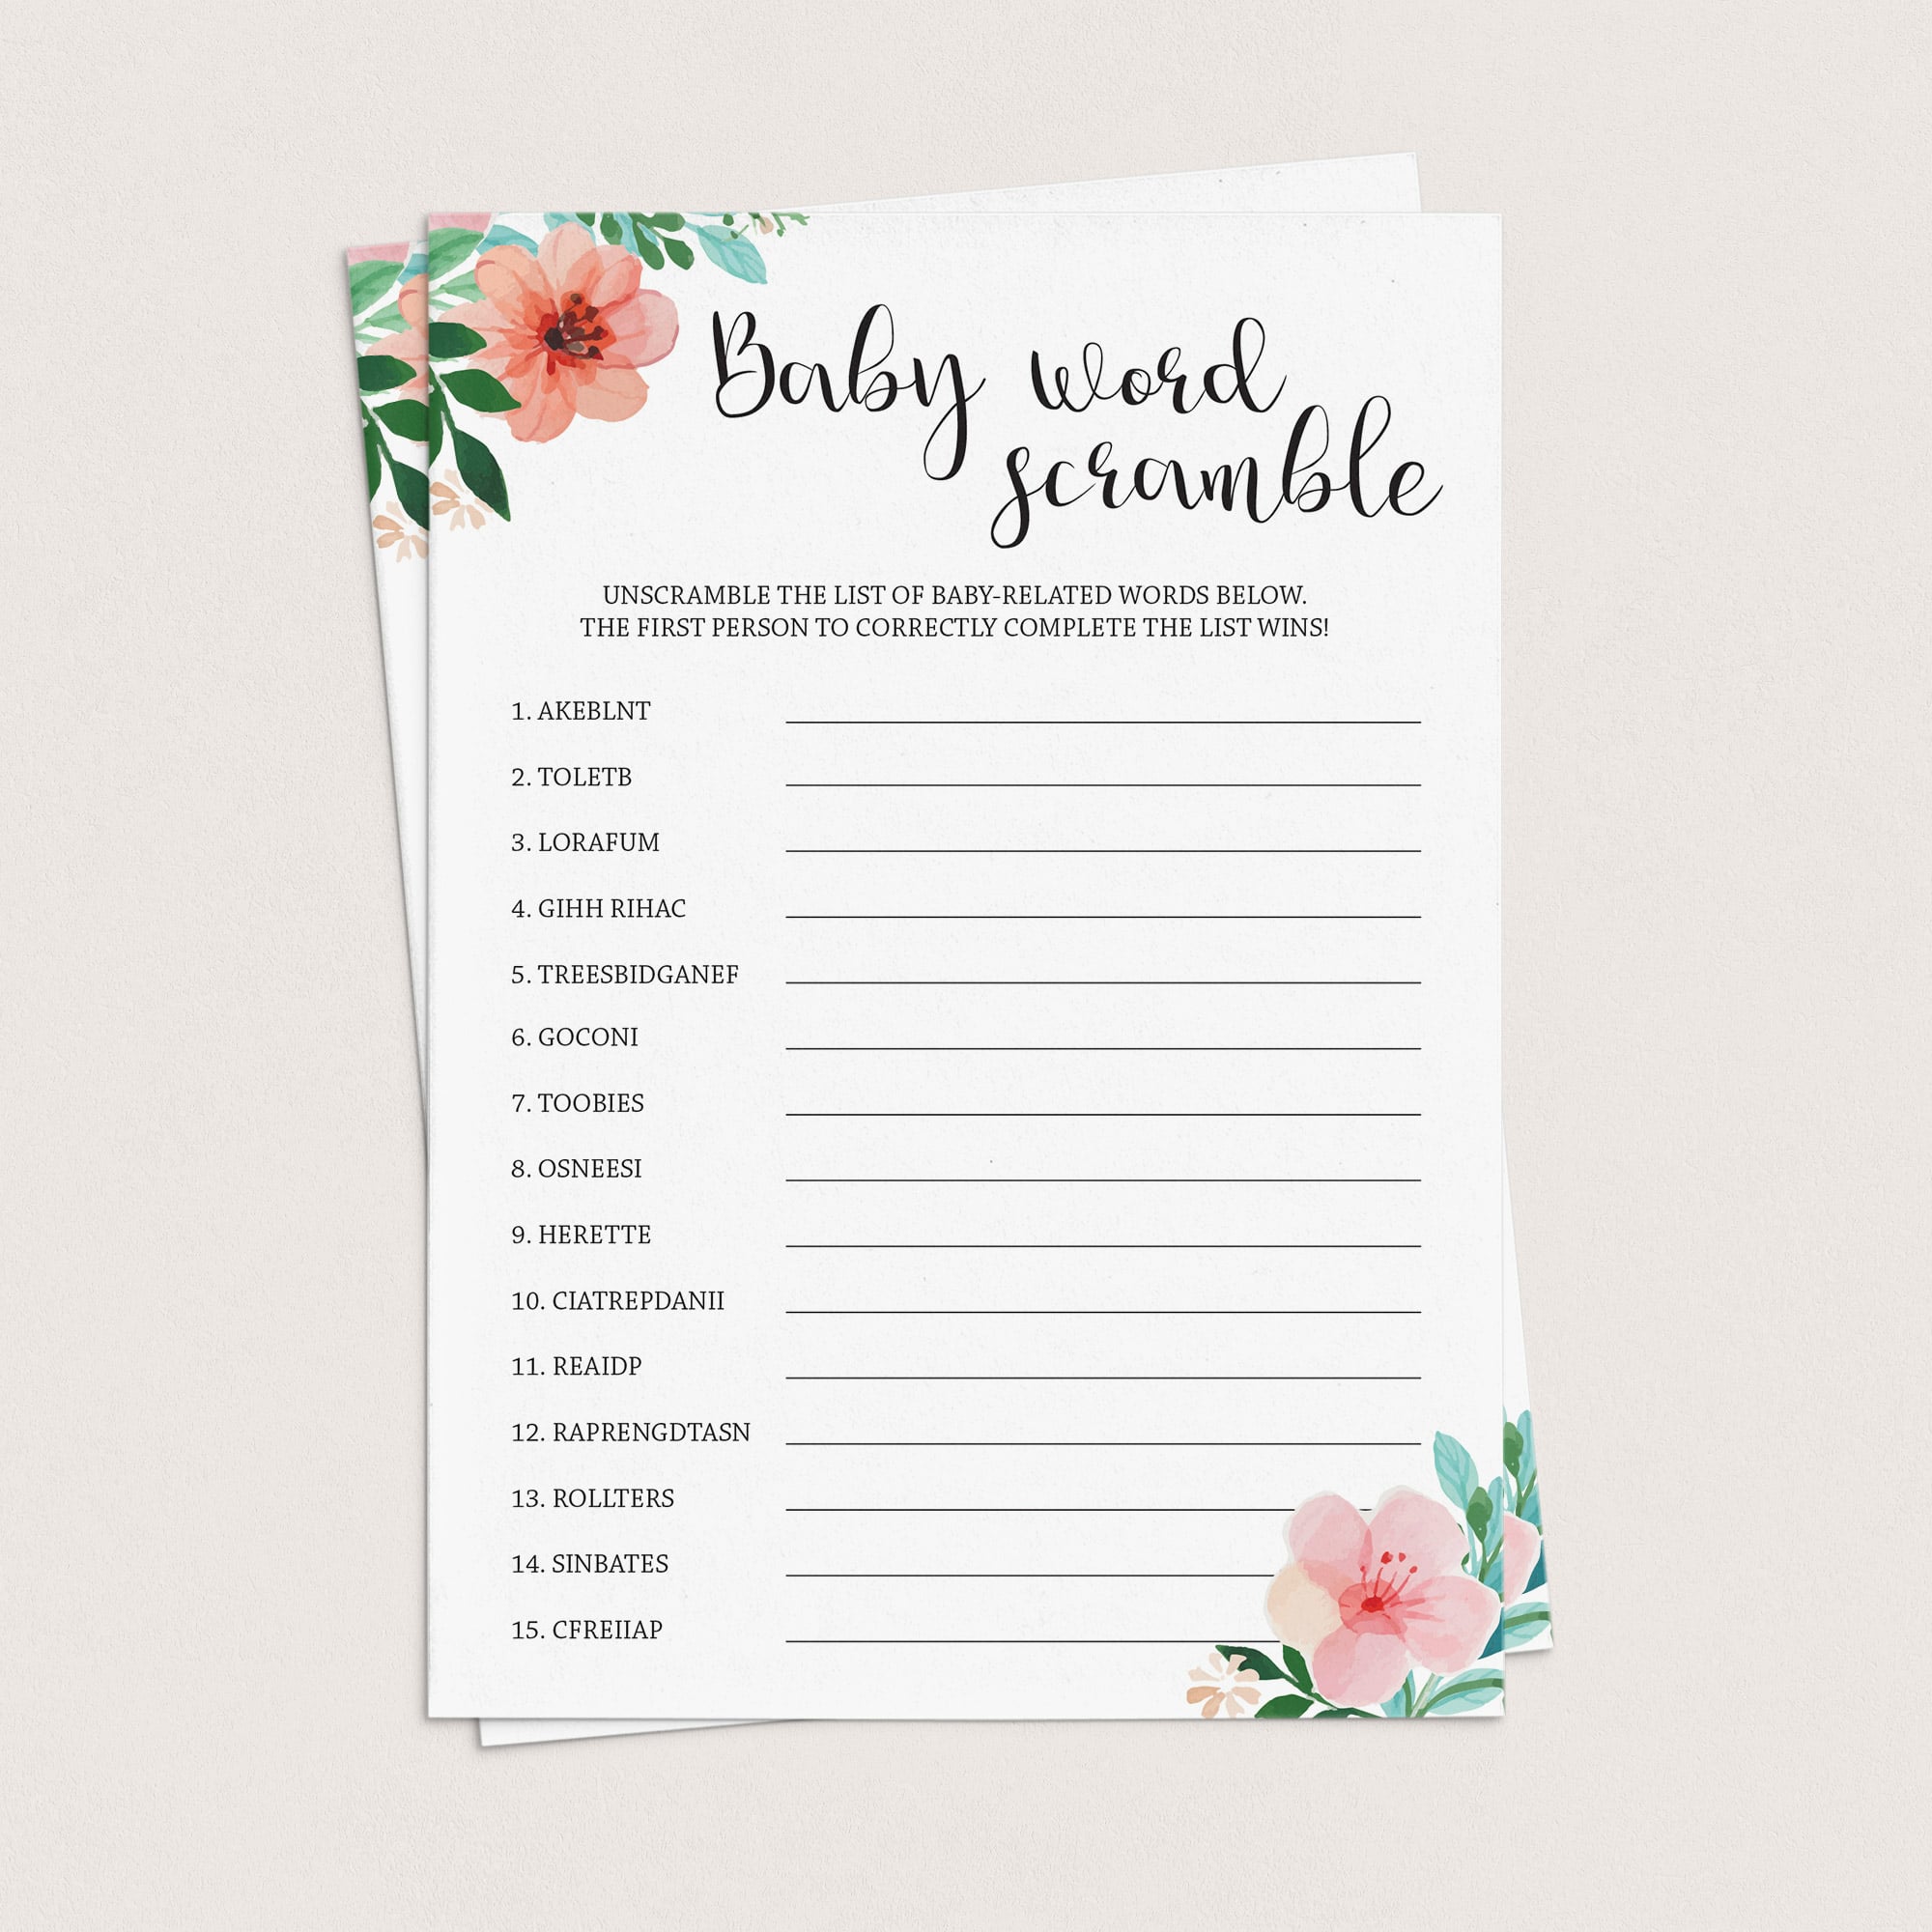 Baby word scramble answers for baby shower by LittleSizzle